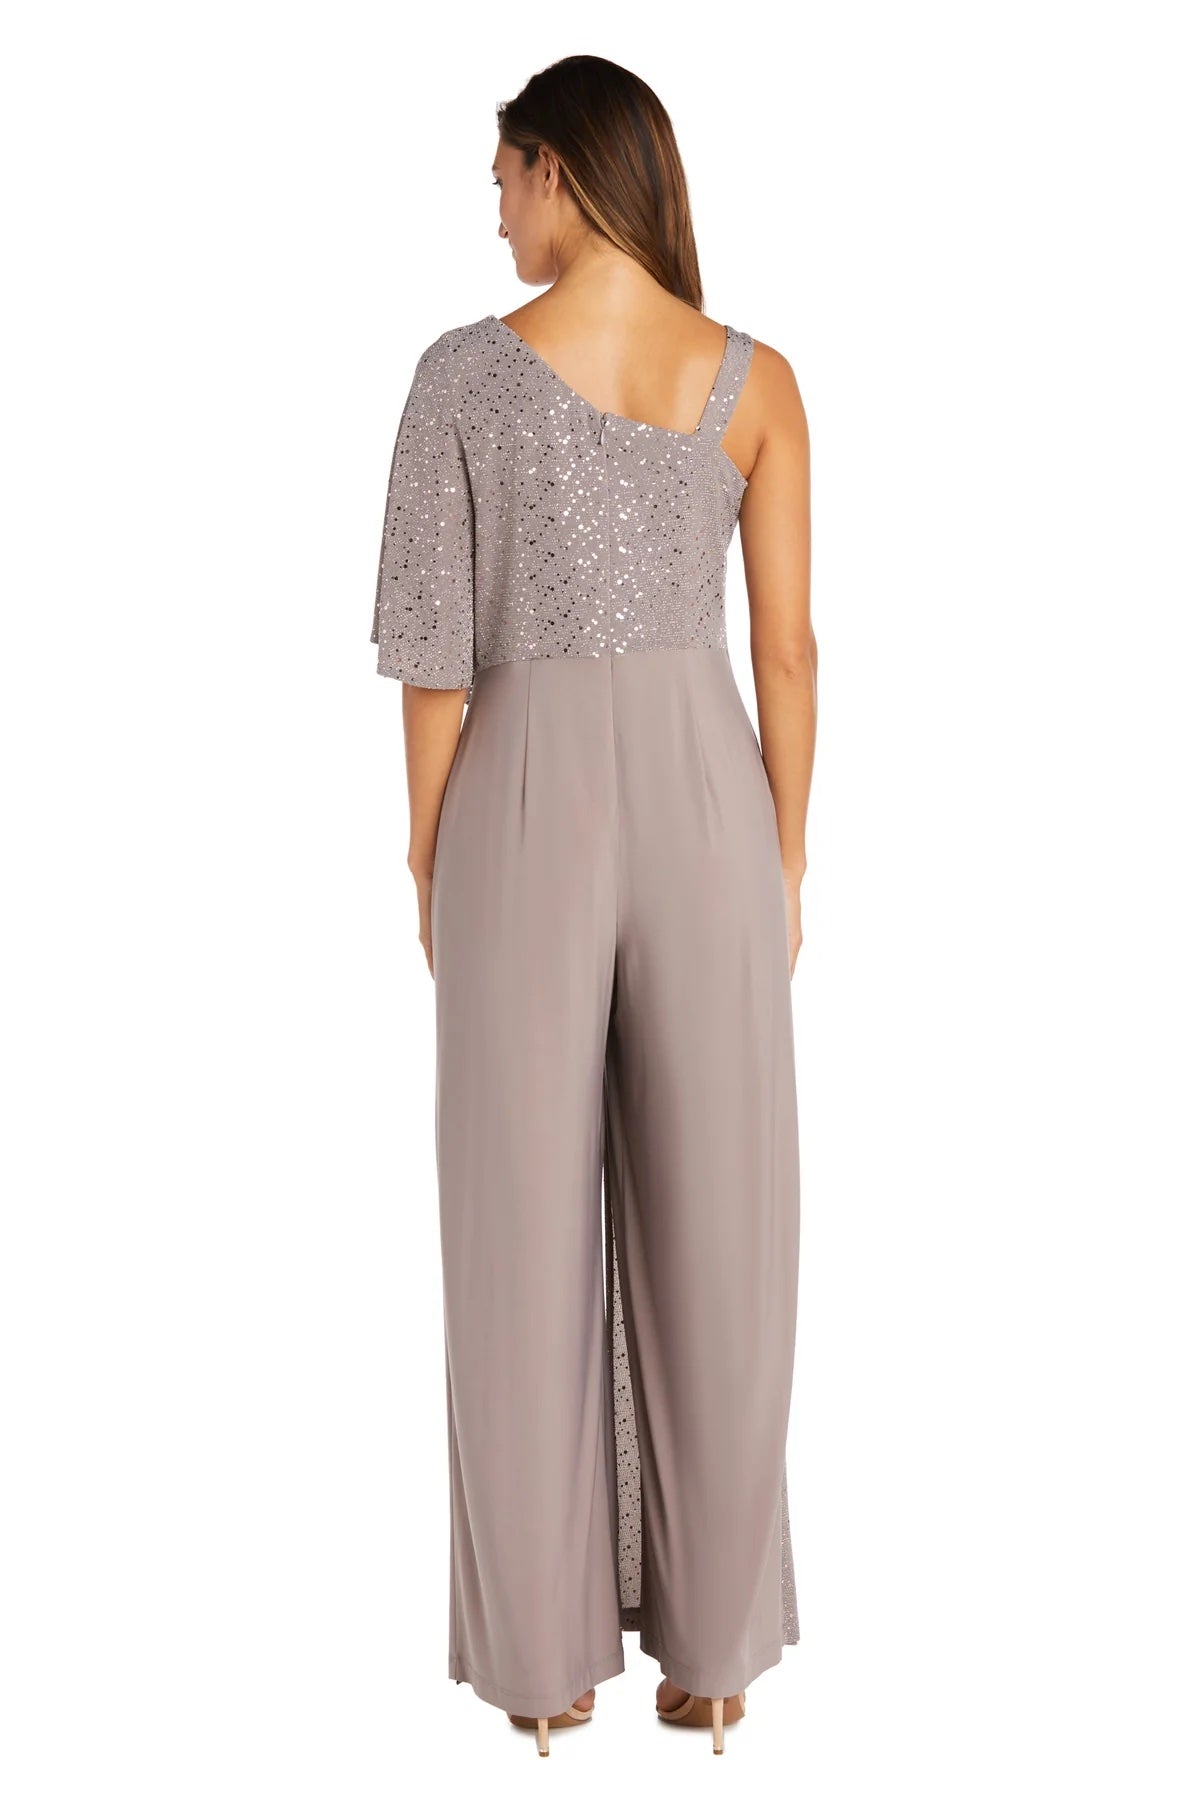 Discover more than 225 plus size formal jumpsuits